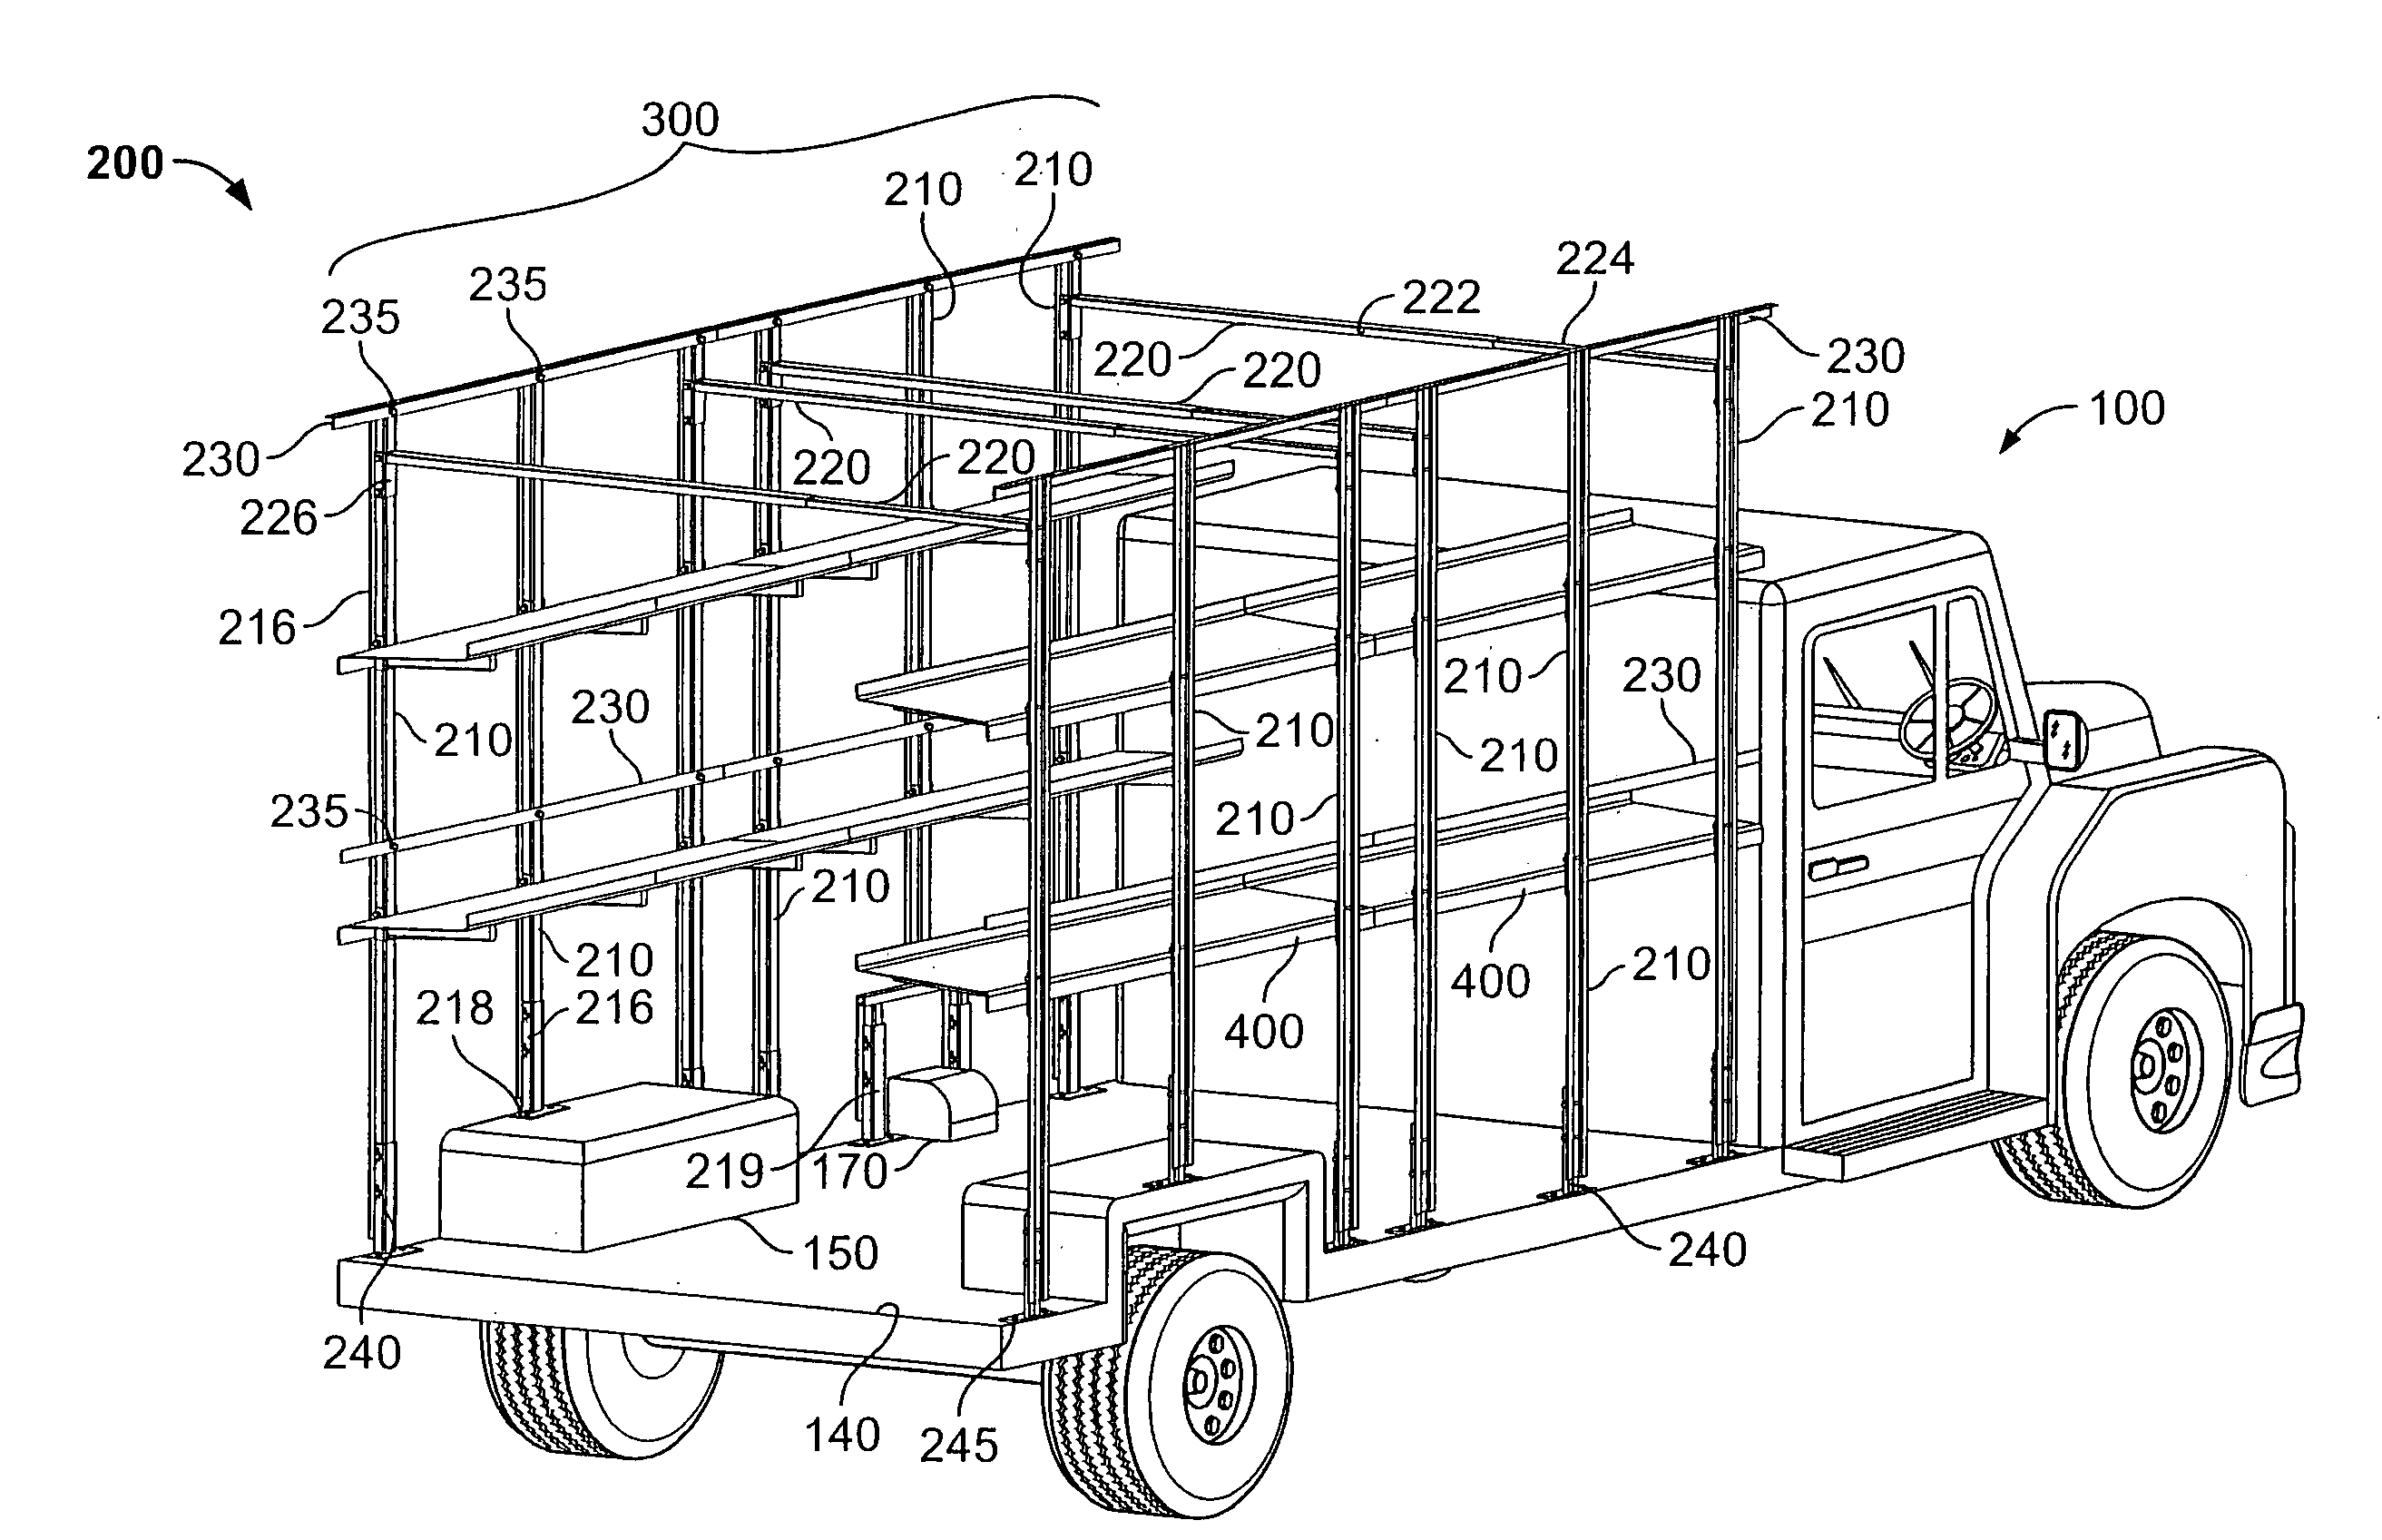 Structurally independent load bearing support system